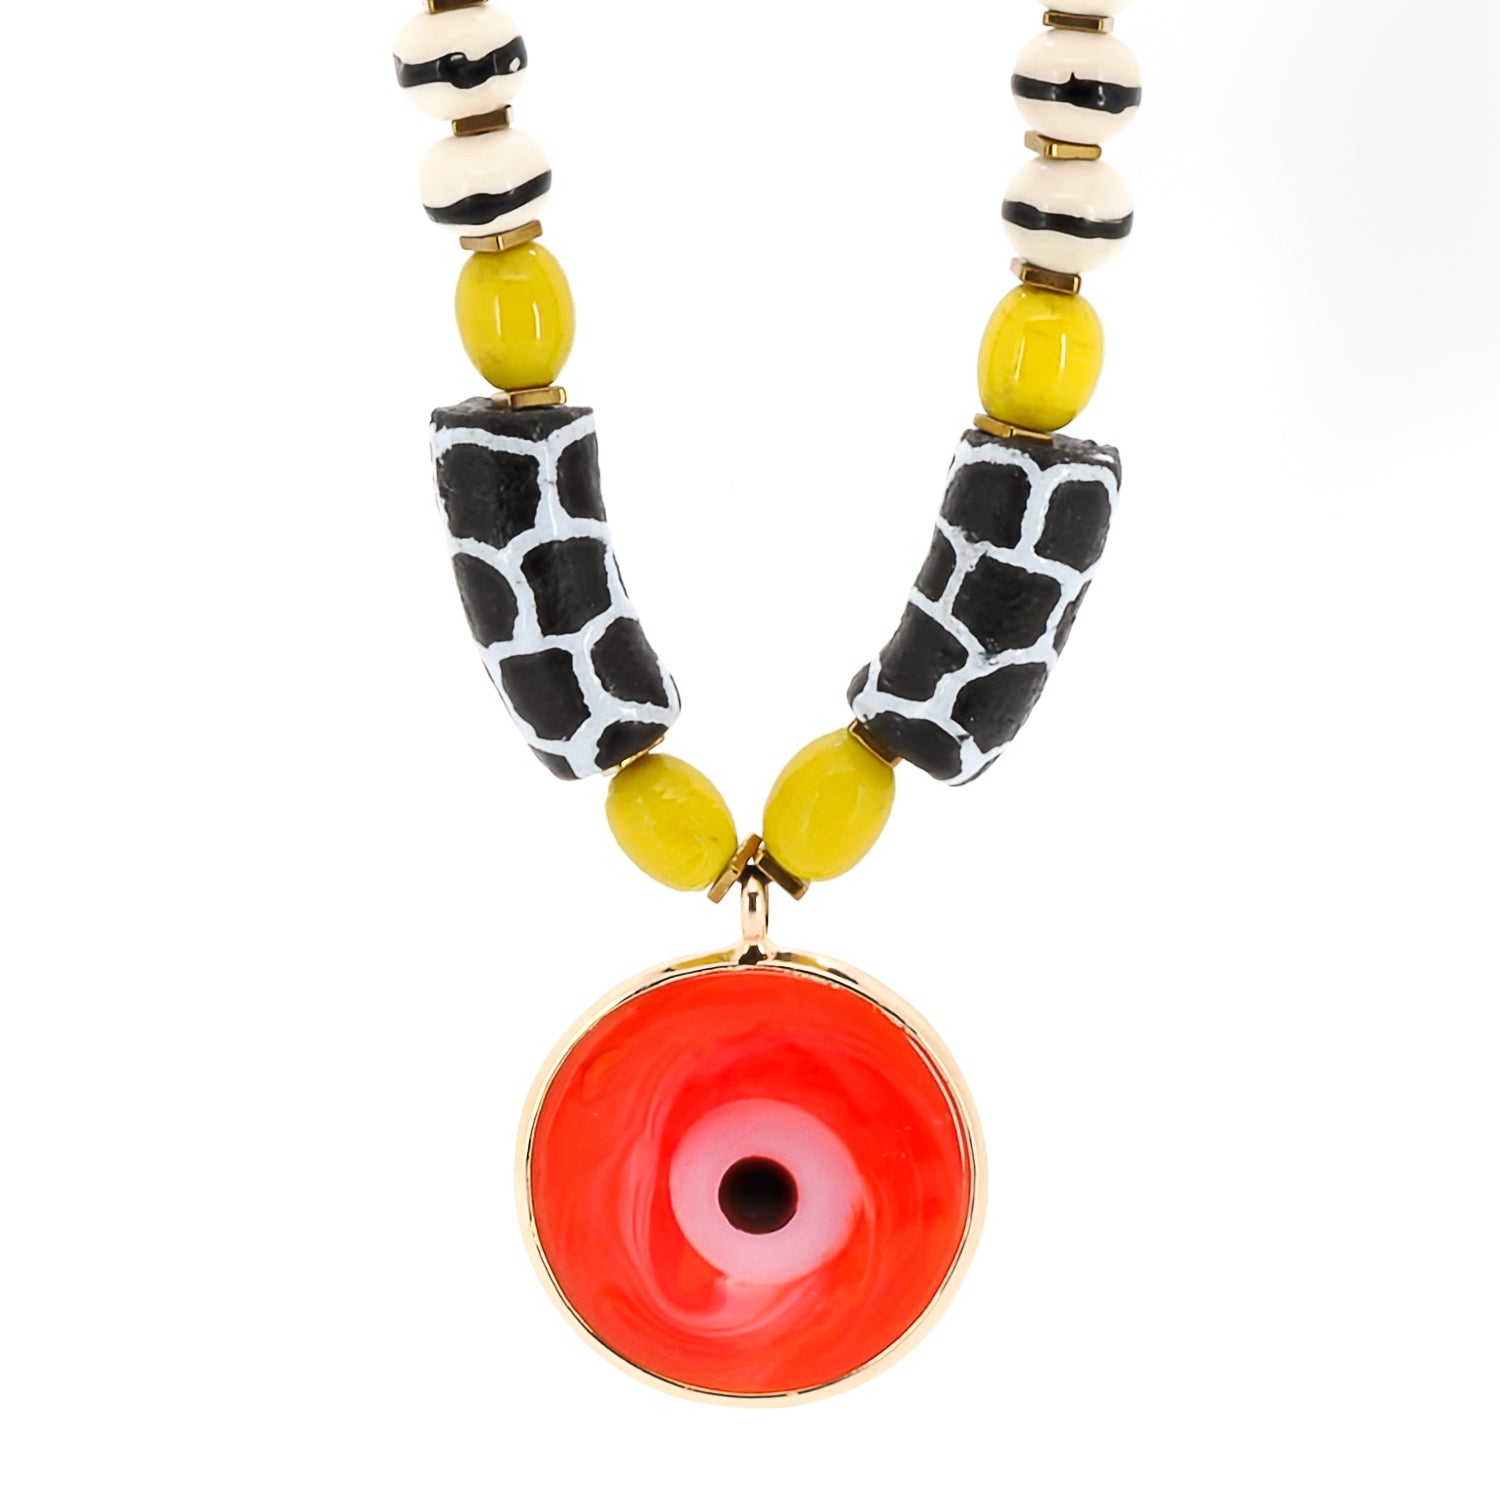 Large Ceramic black and white beads on the African Yellow Happiness Necklace, adding a unique touch to the design.